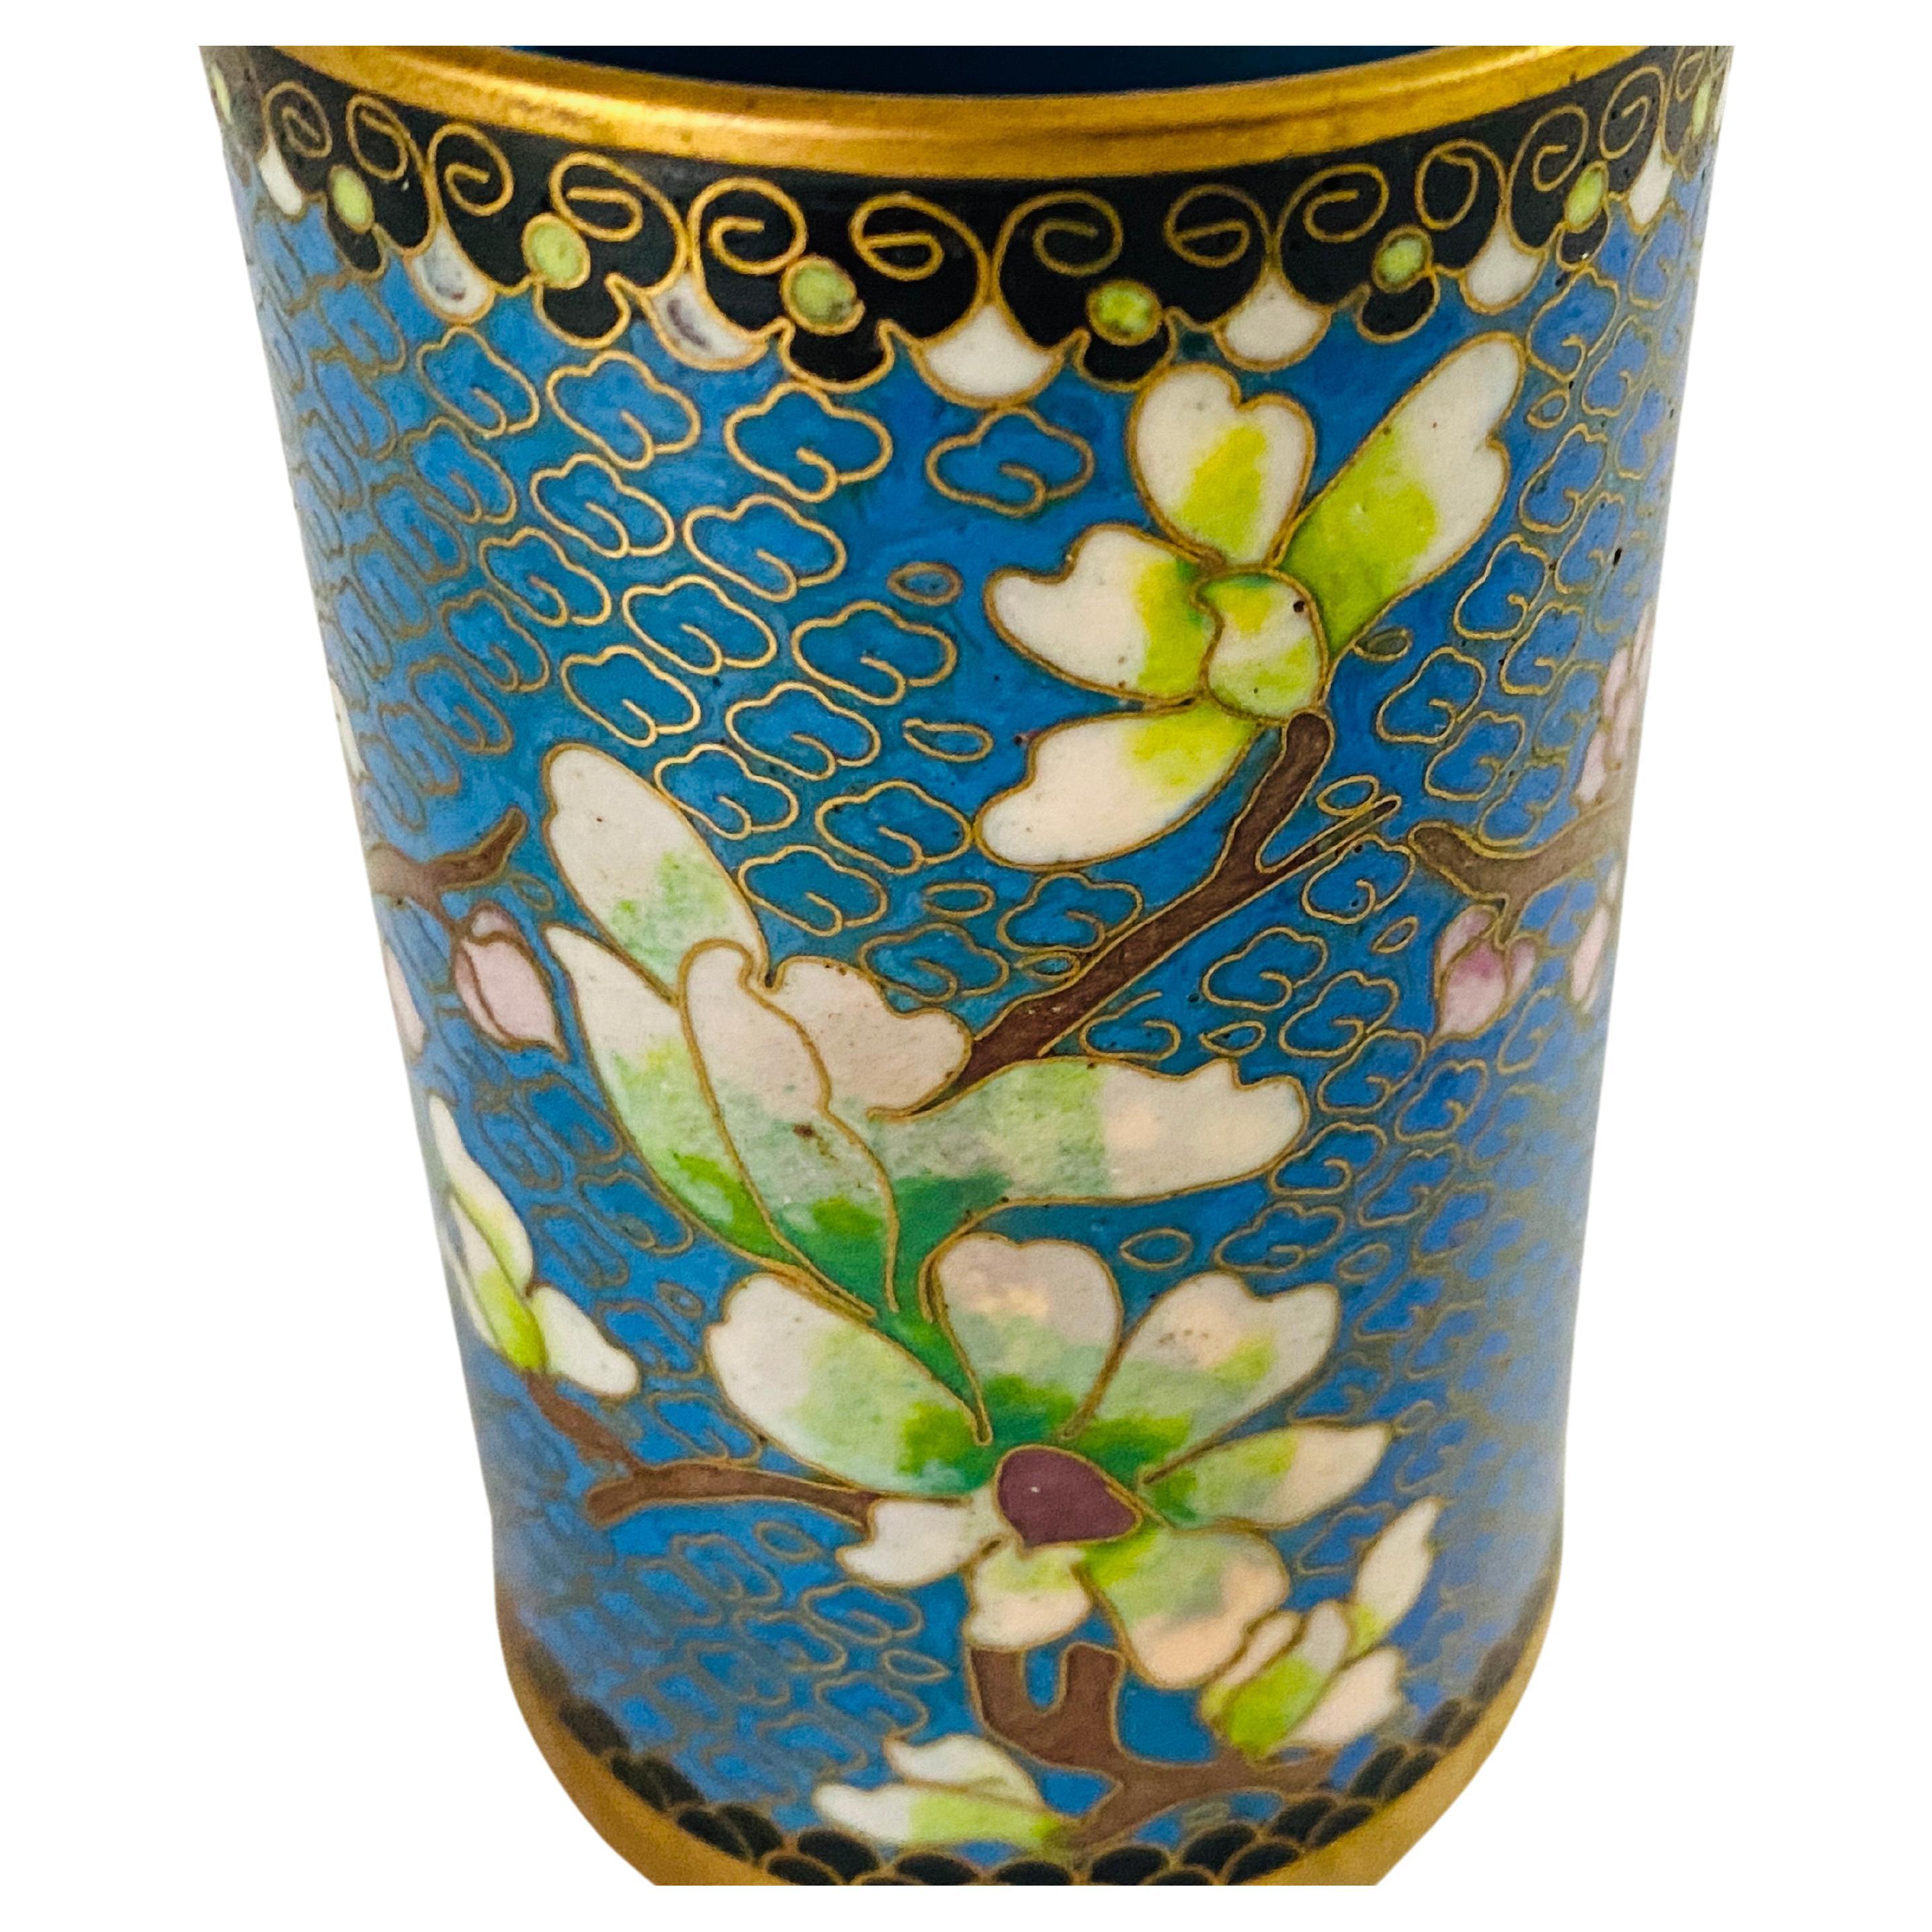 Brush holders, or pen holders, from China made of Cloisoné Ceramic at the beginning of the 20th century. The Decor Patern are Fowers.
The Color is blue.